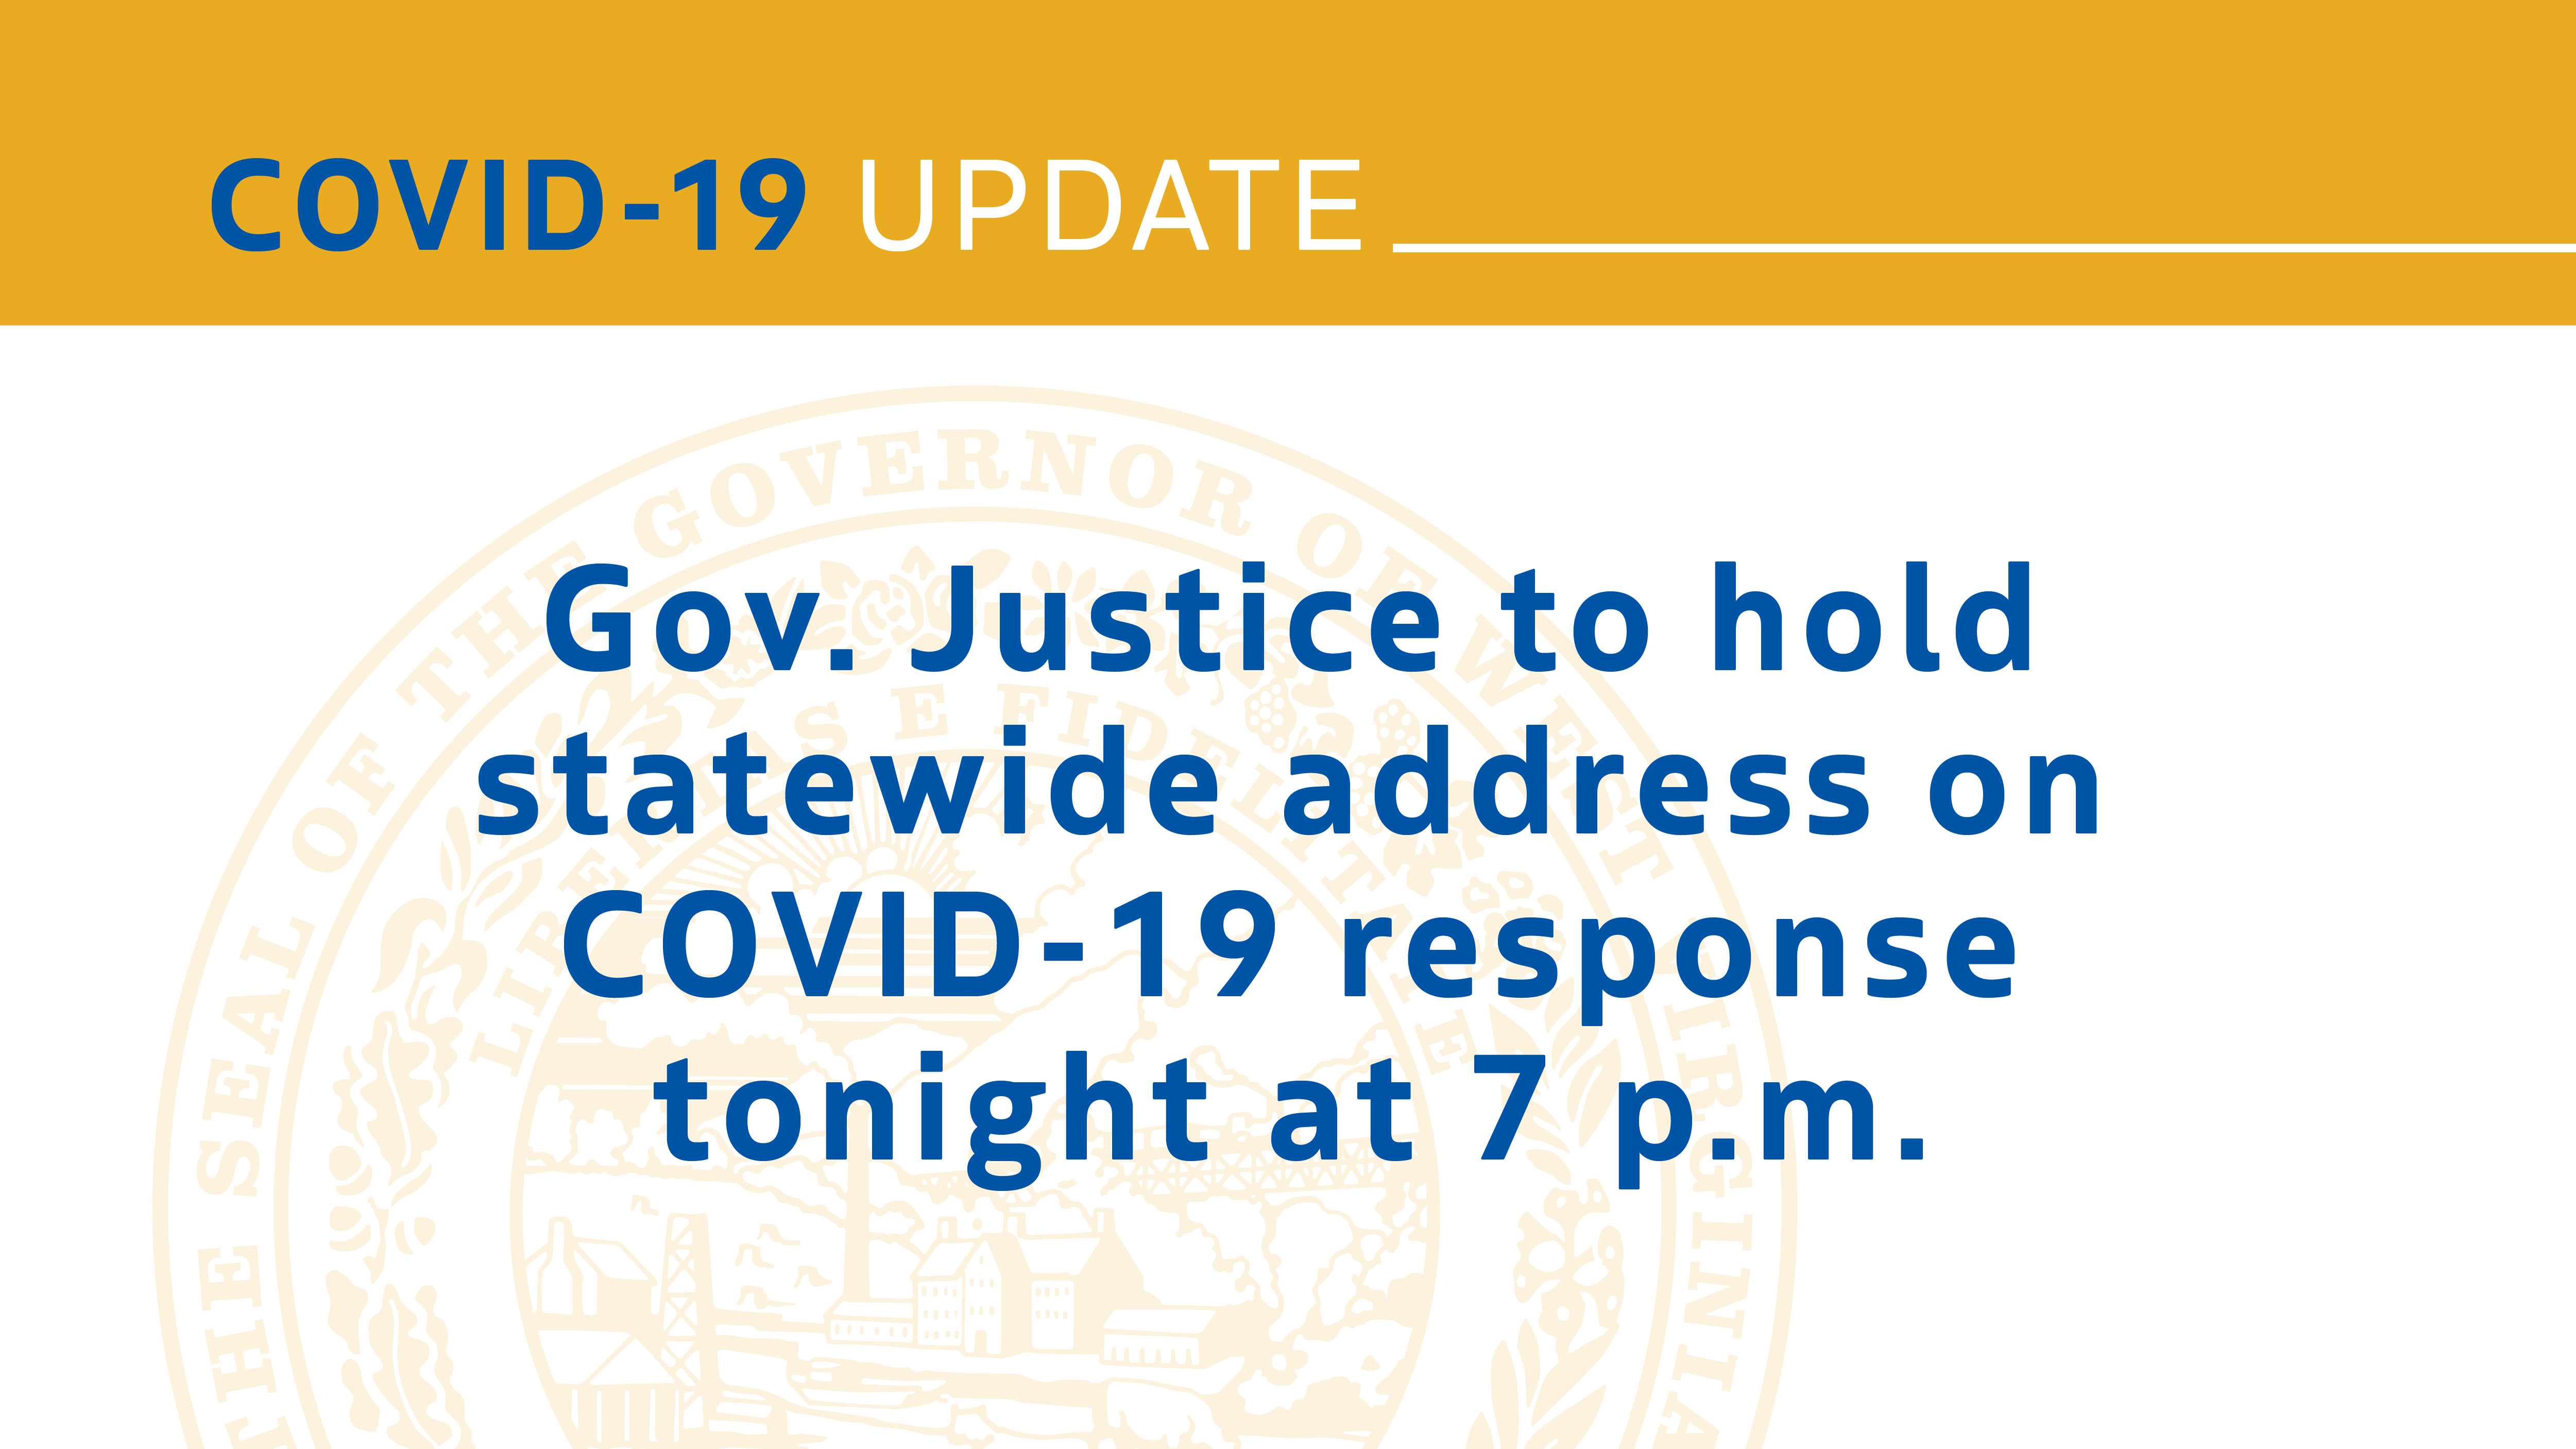 Gov Justice To Hold Statewide Address On Covid 19 Response Tonight At